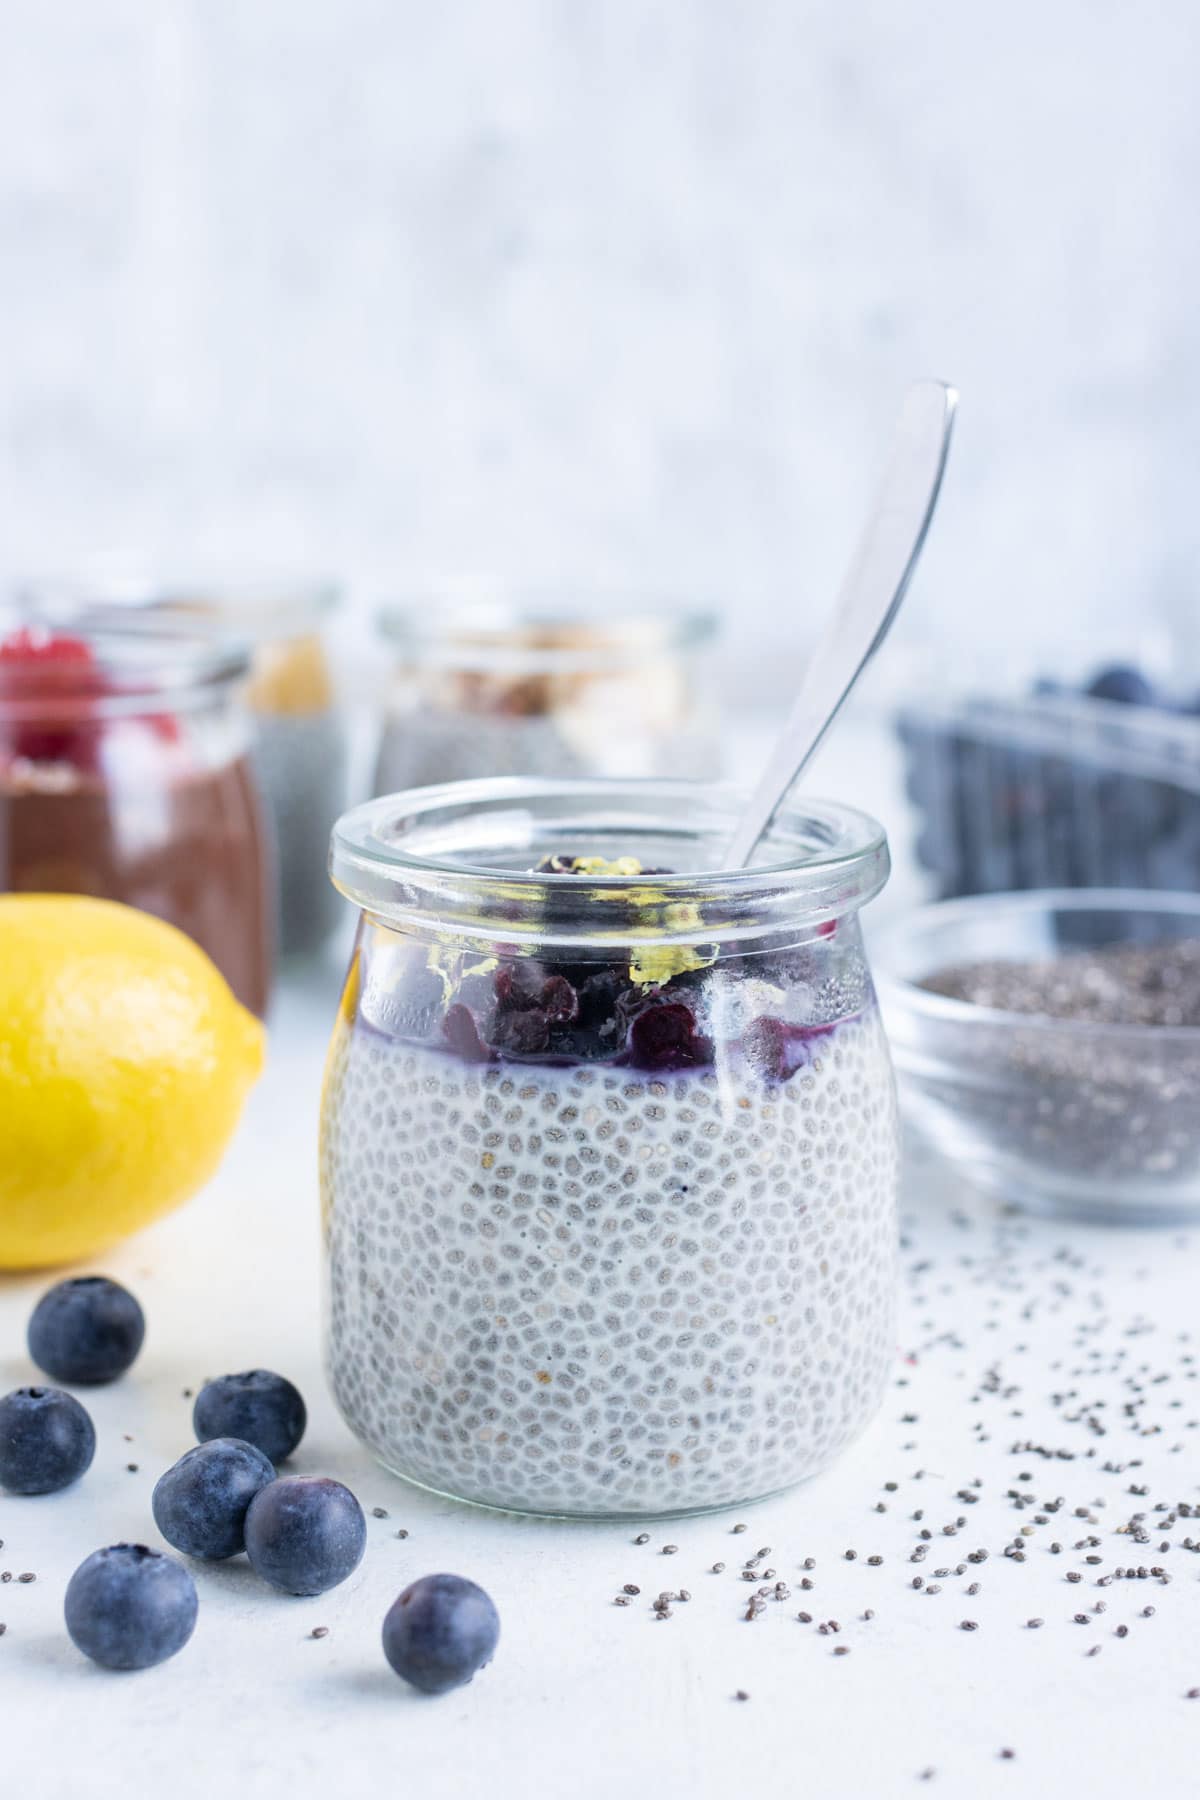 Lemon blueberry flavored chia seed pudding is shown in a jar with a spoon.